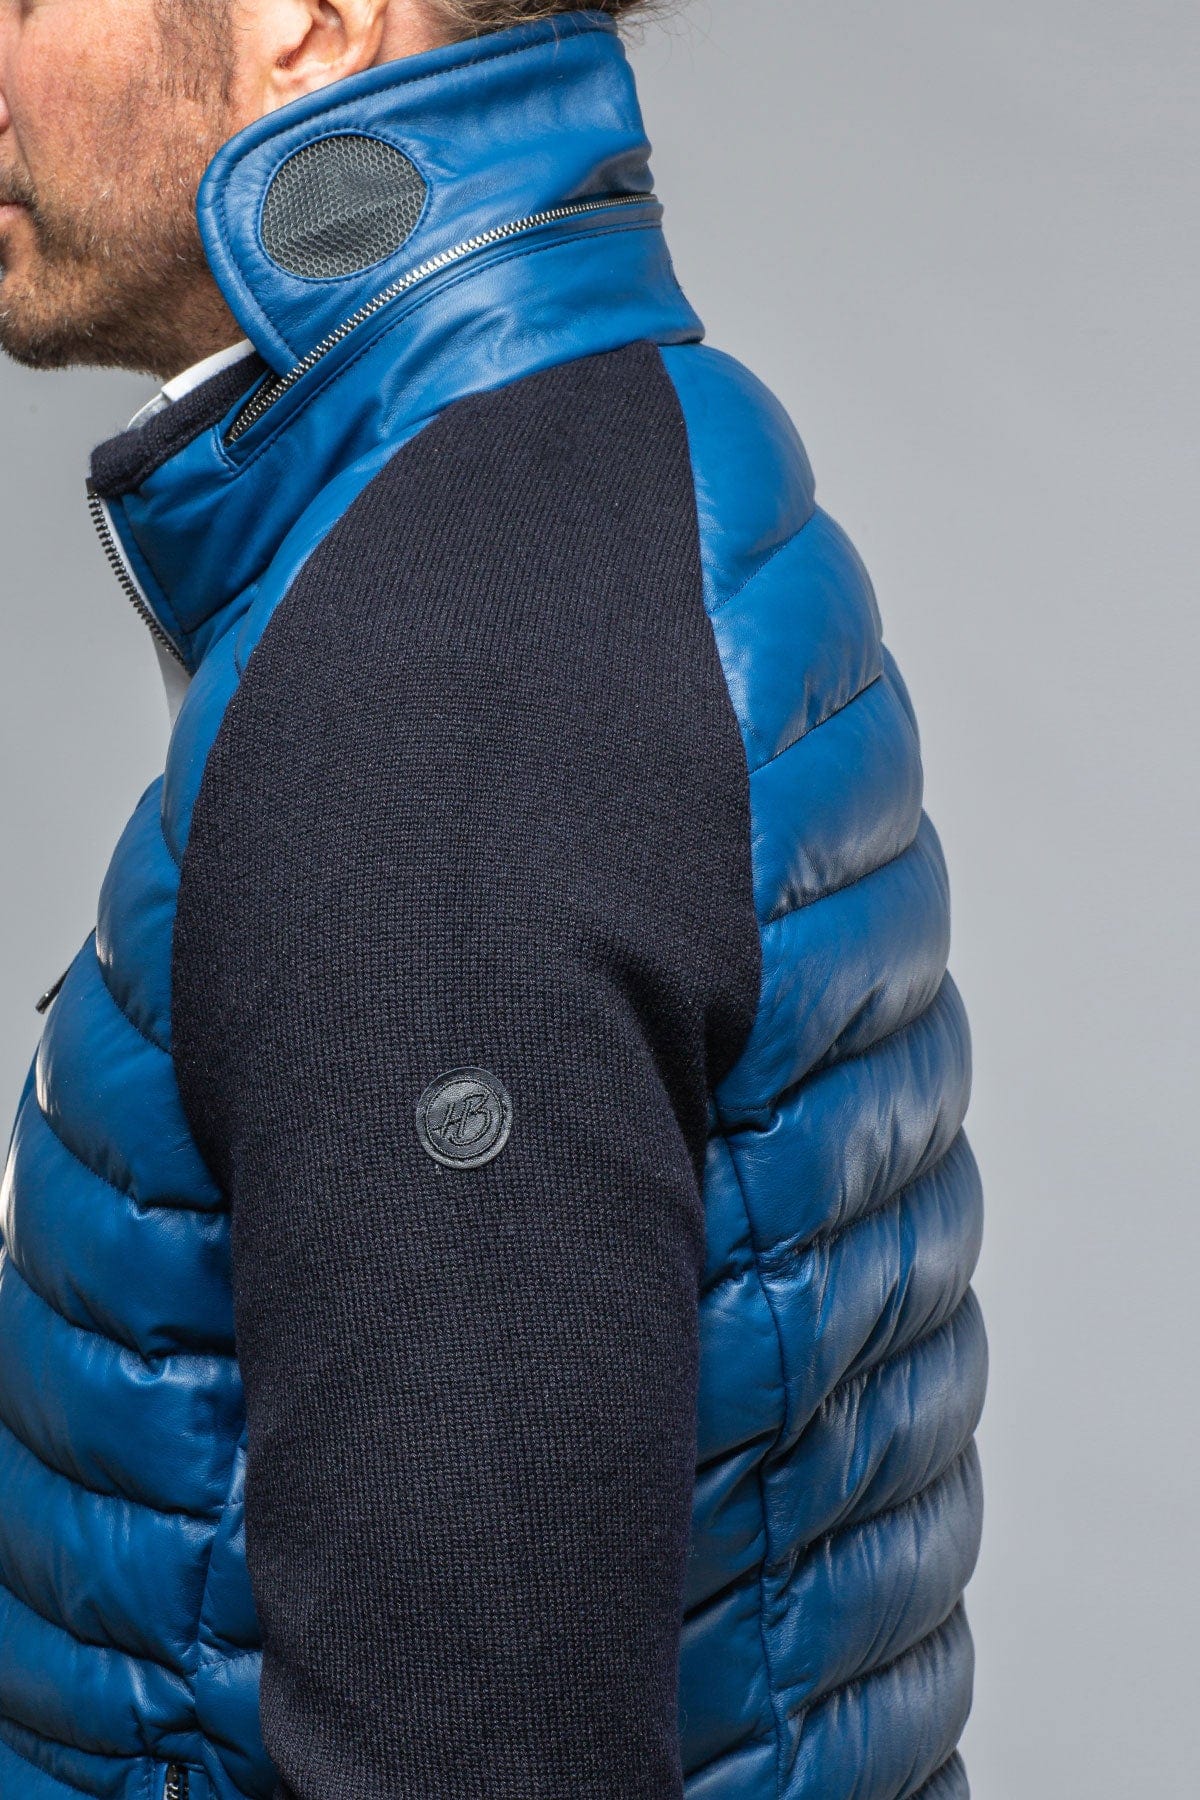 Sepang Sweater Jacket in Blue and Navy - AXEL'S